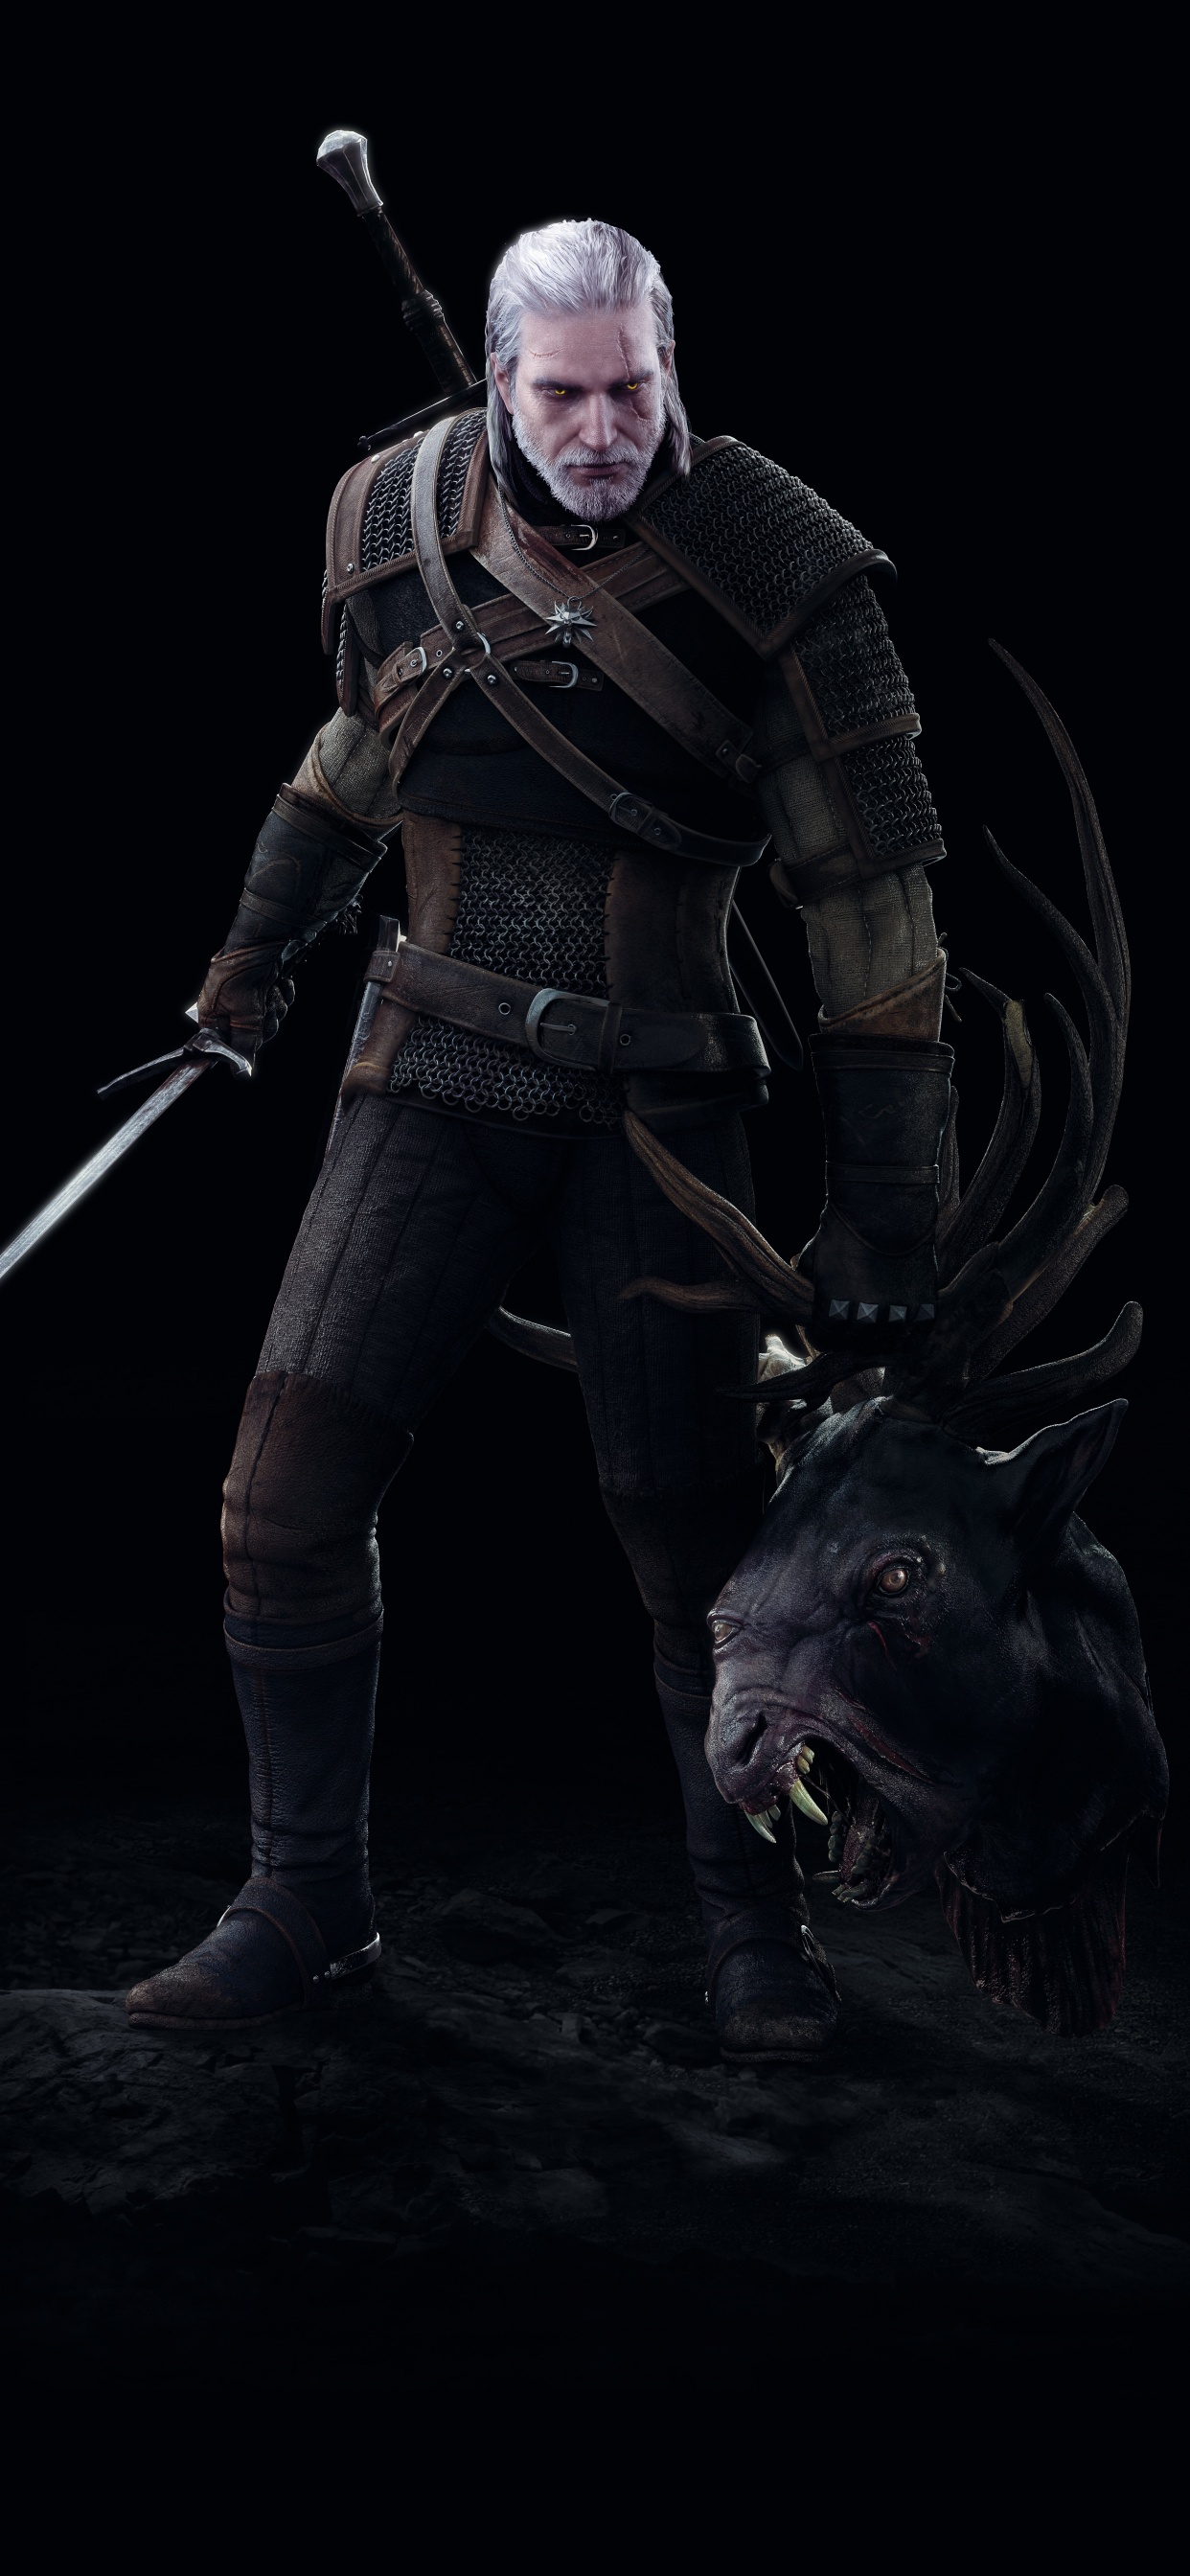 The Witcher 3 Wild Hunt, Geralt of Rivia, Darkness, Action Figure, Outerwear. Wallpaper in 1242x2688 Resolution